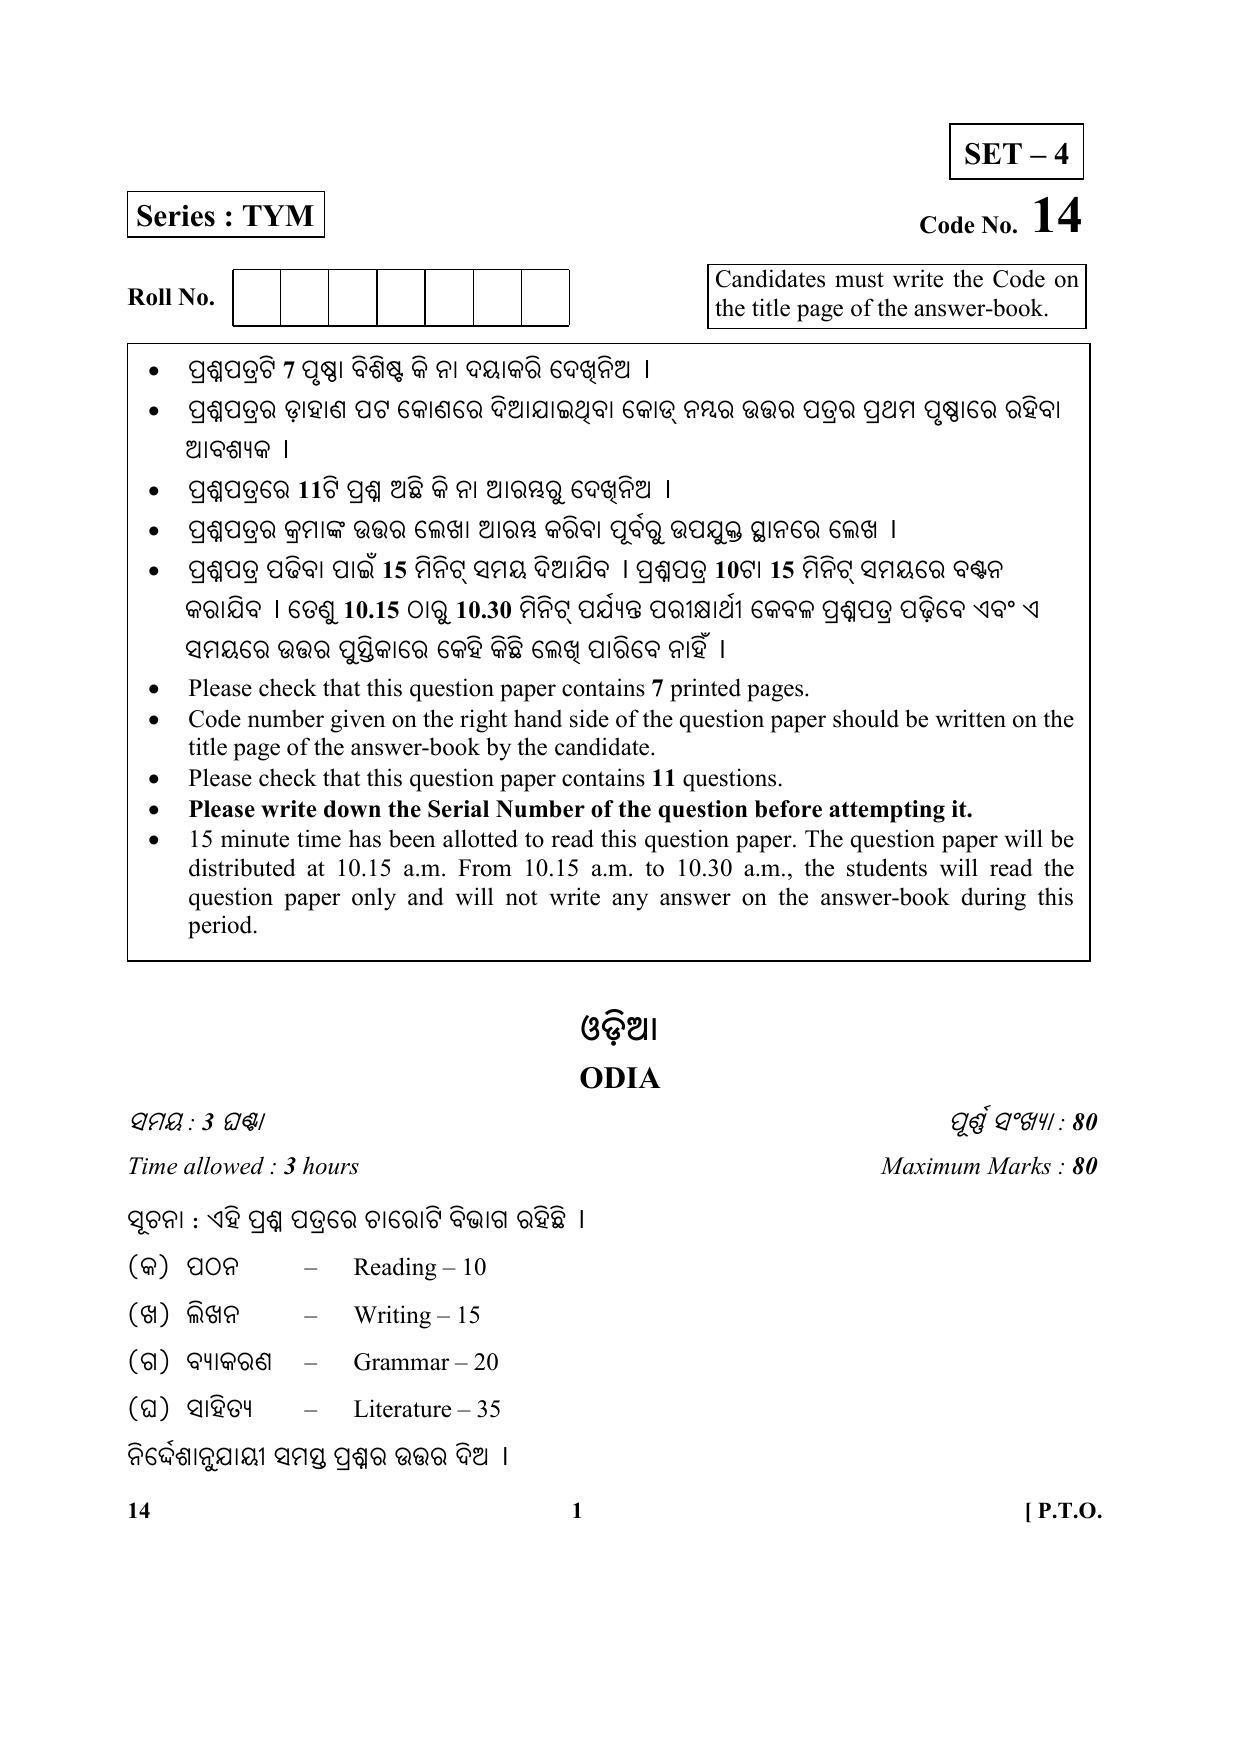 CBSE Class 10 14 (Odia) 2018 Question Paper - Page 1